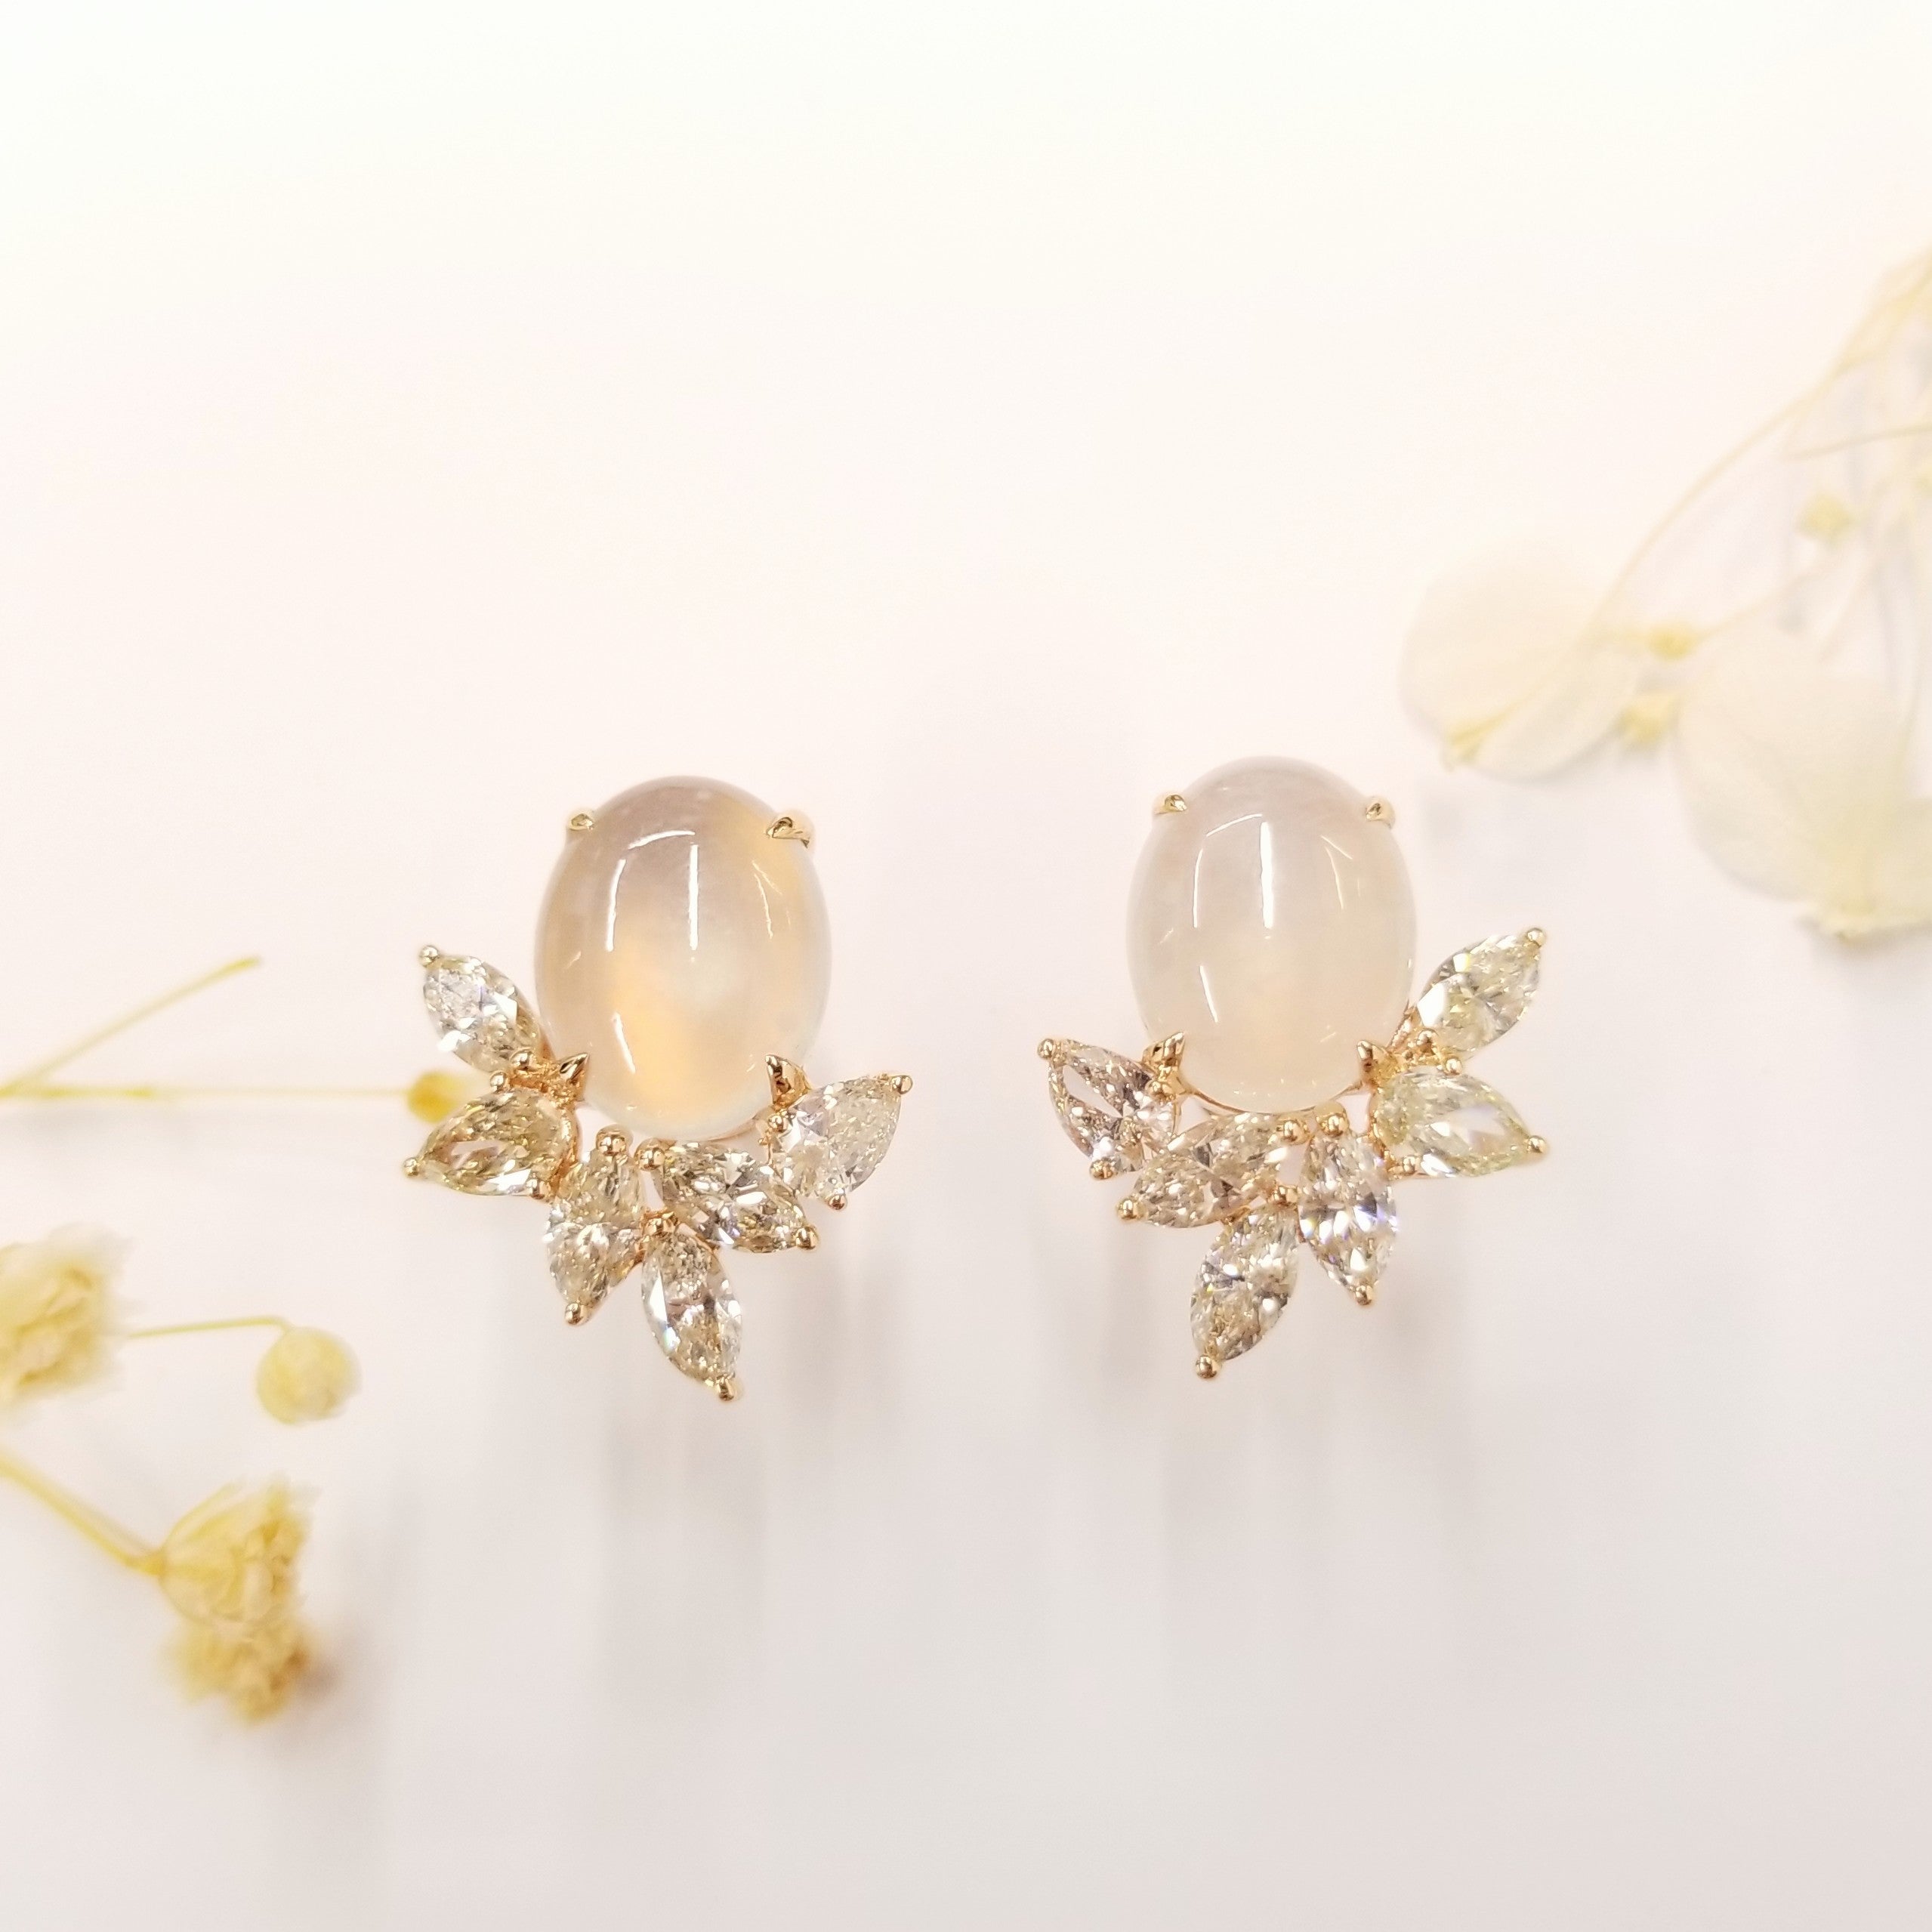 These captivating earrings showcase a symphony of elegance and allure, featuring a combination of certified diamonds and a mesmerizing white jade gemstone. Crafted in 18K rose gold, the earrings exude a warm and romantic glow, complementing the